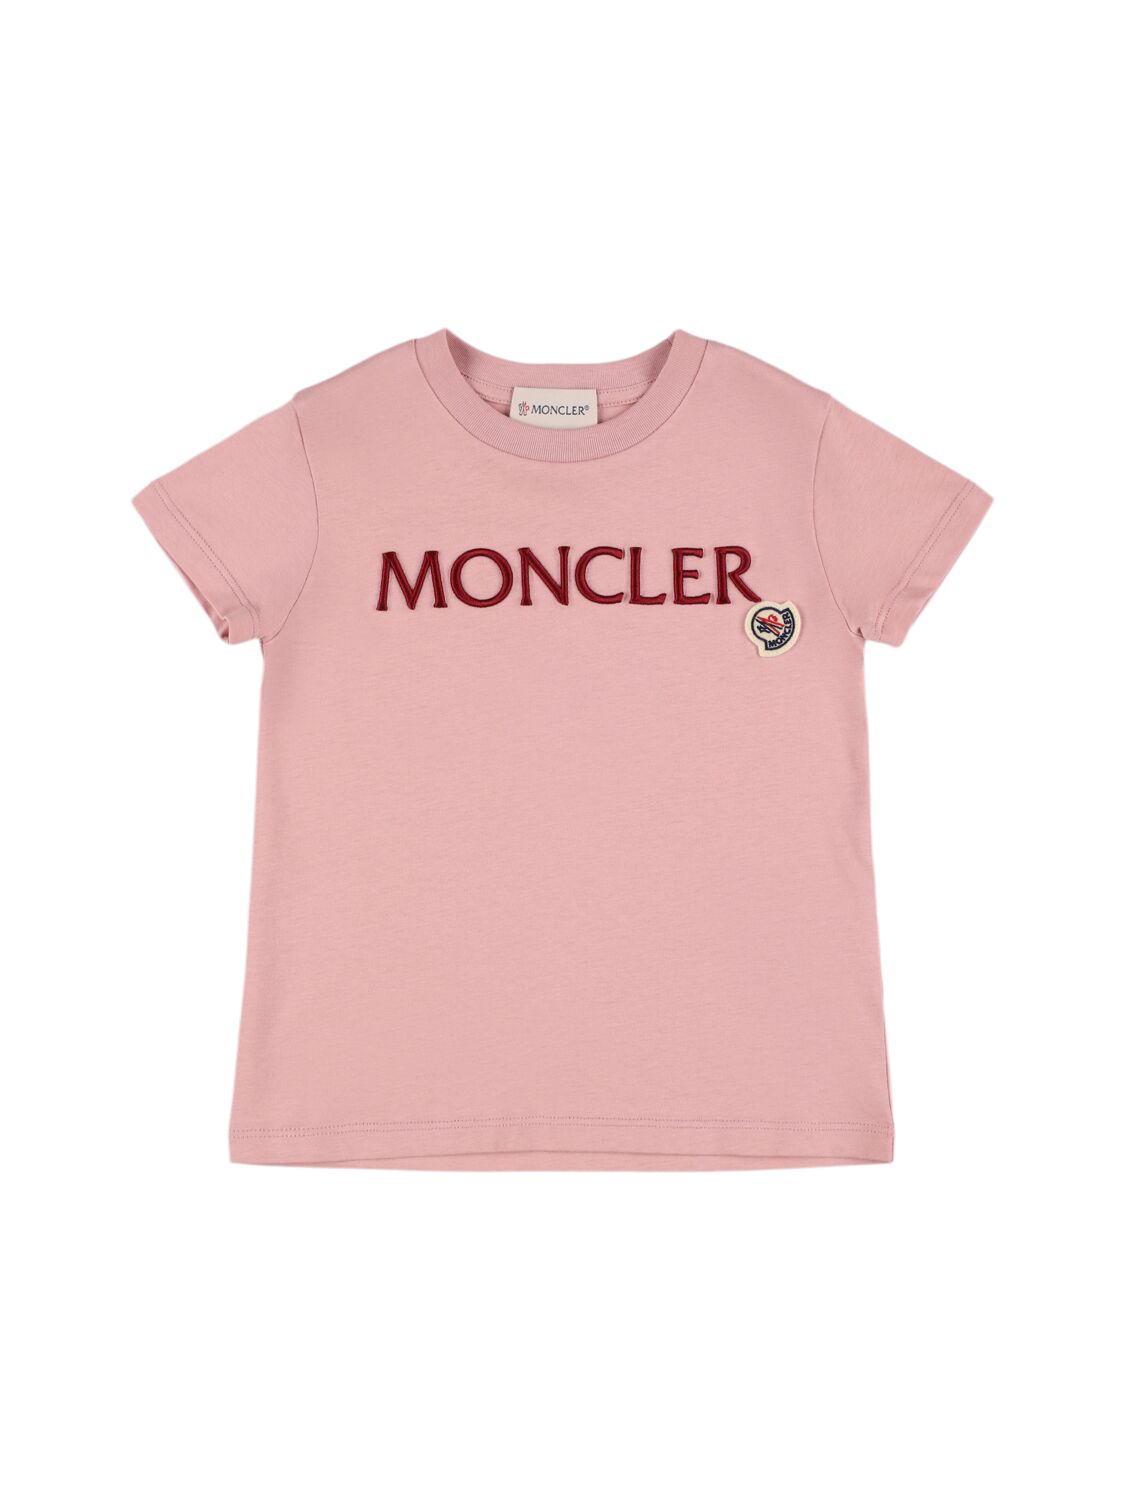 Moncler Embroidered Logo Cotton T-shirt In 玫瑰粉